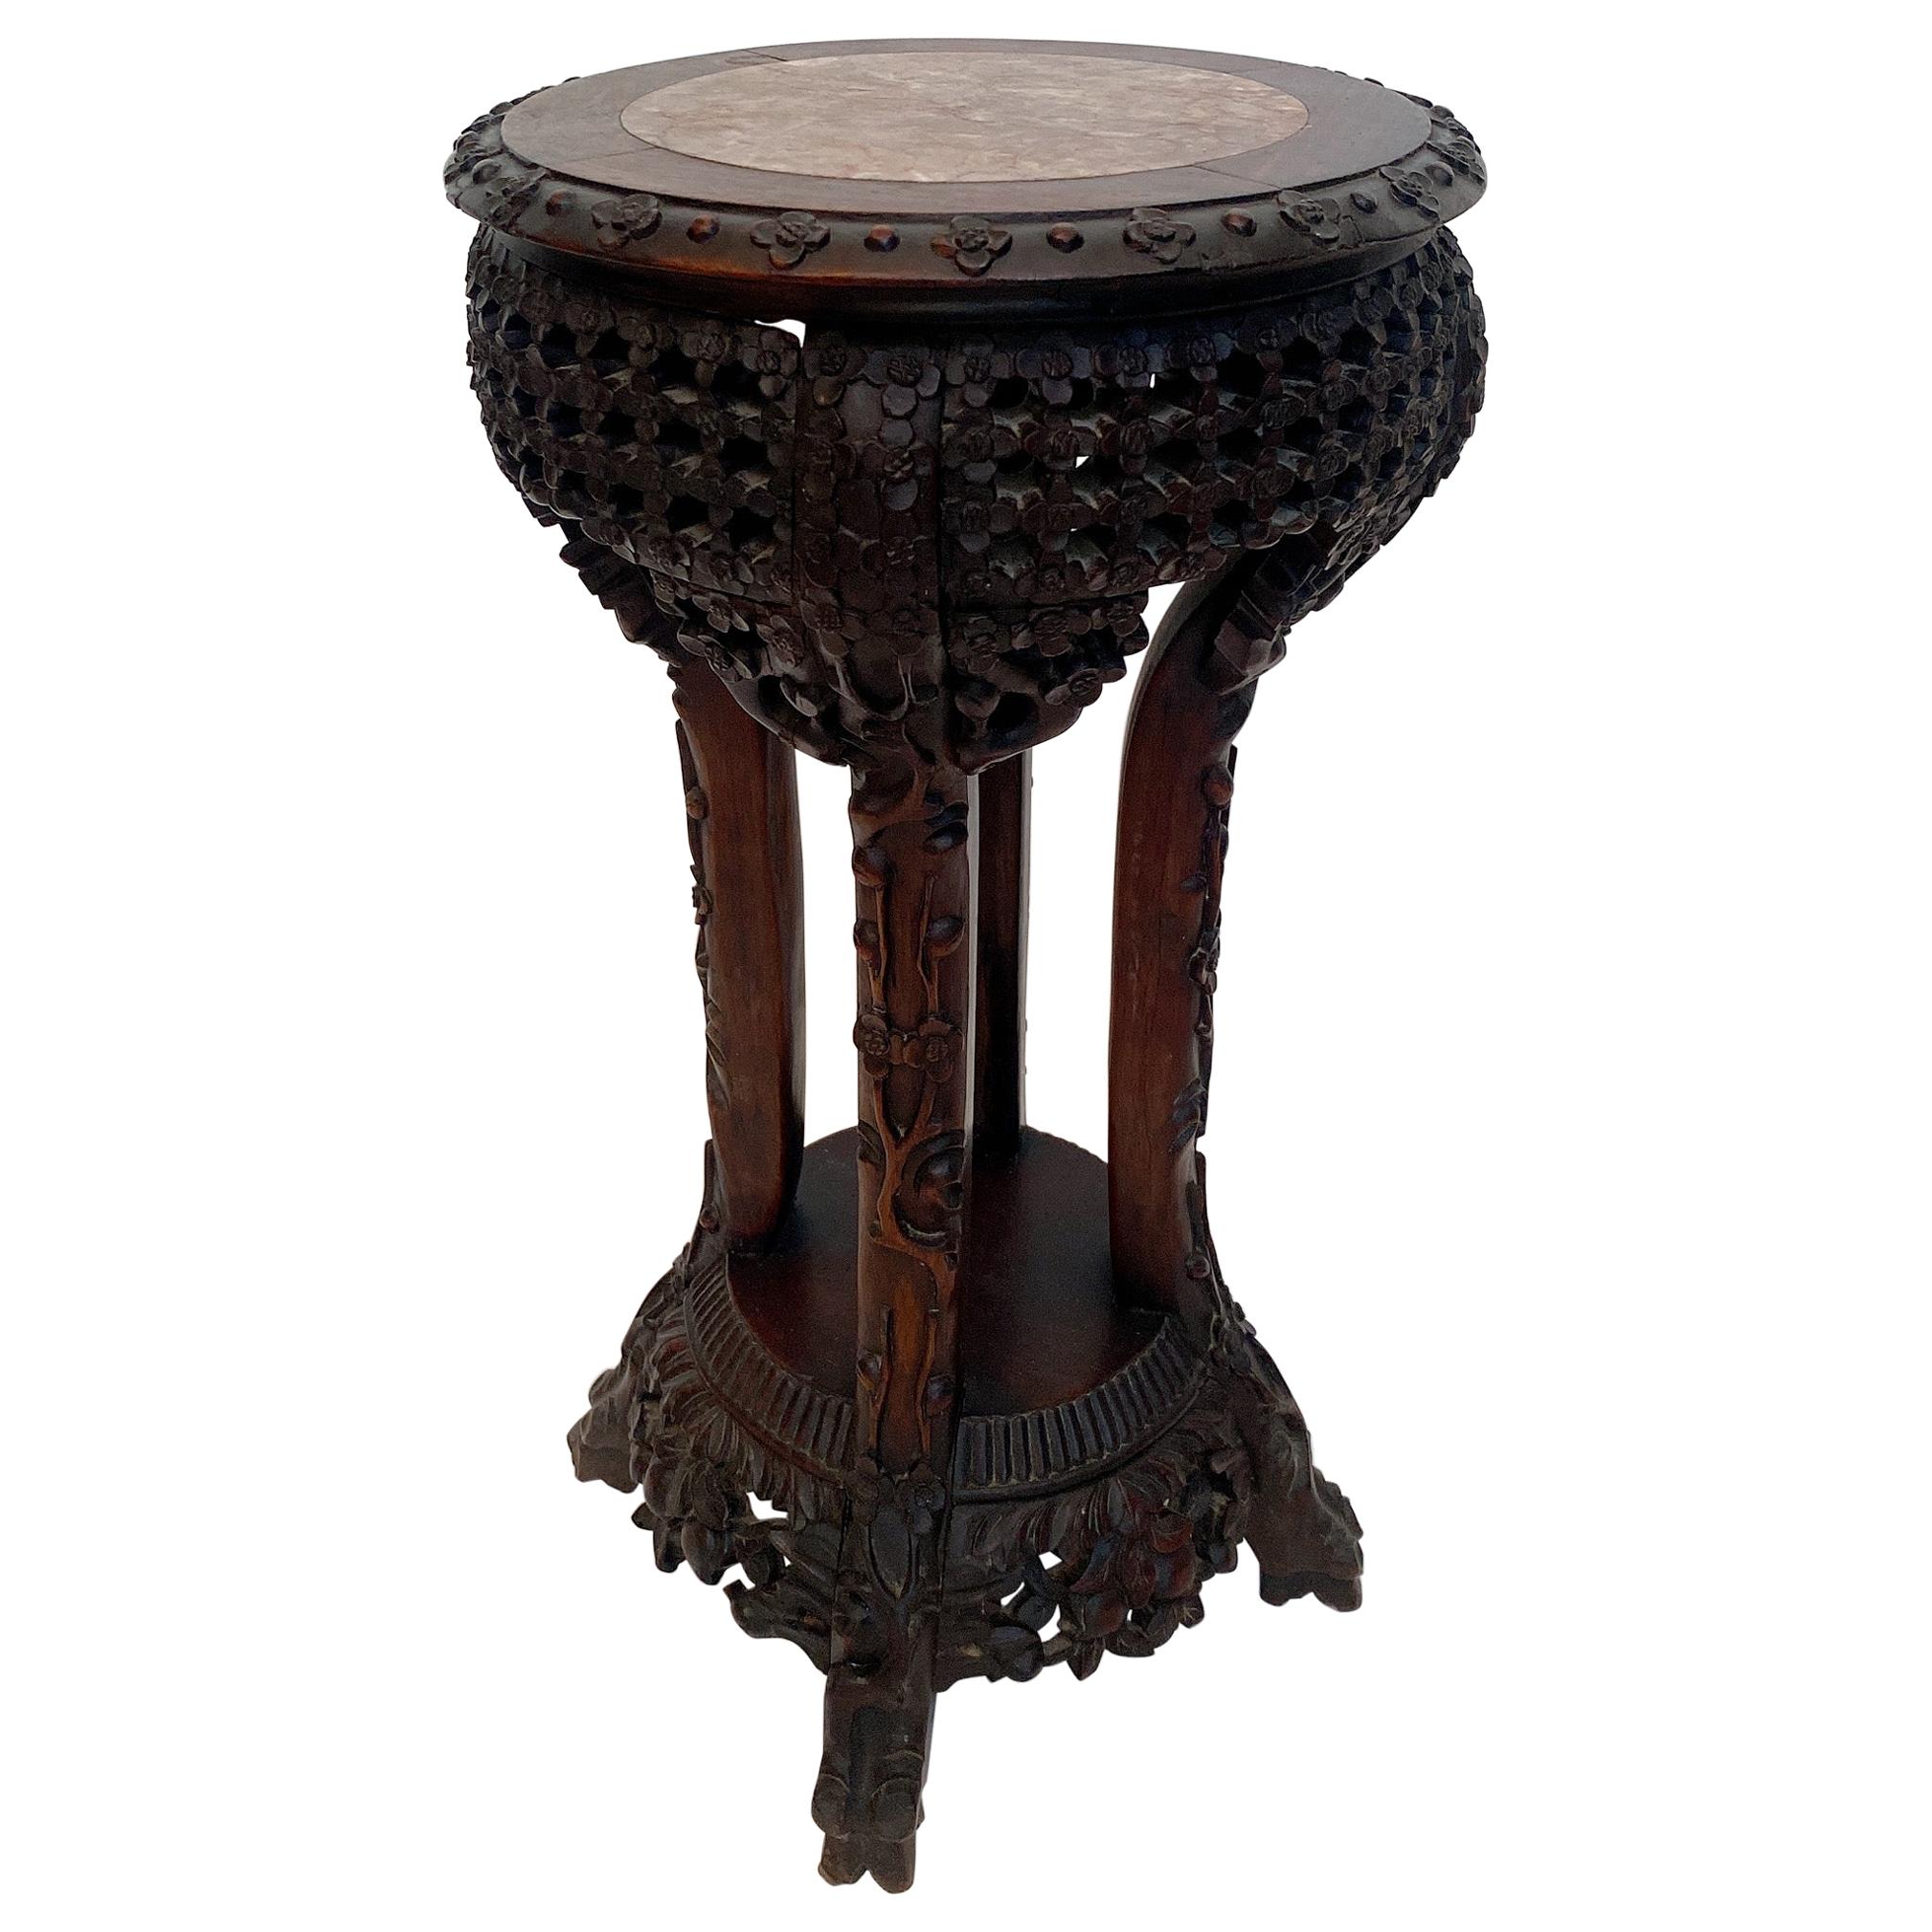 Antique Chinese Carved Hardwood Flower Stands Marble-Top Insert